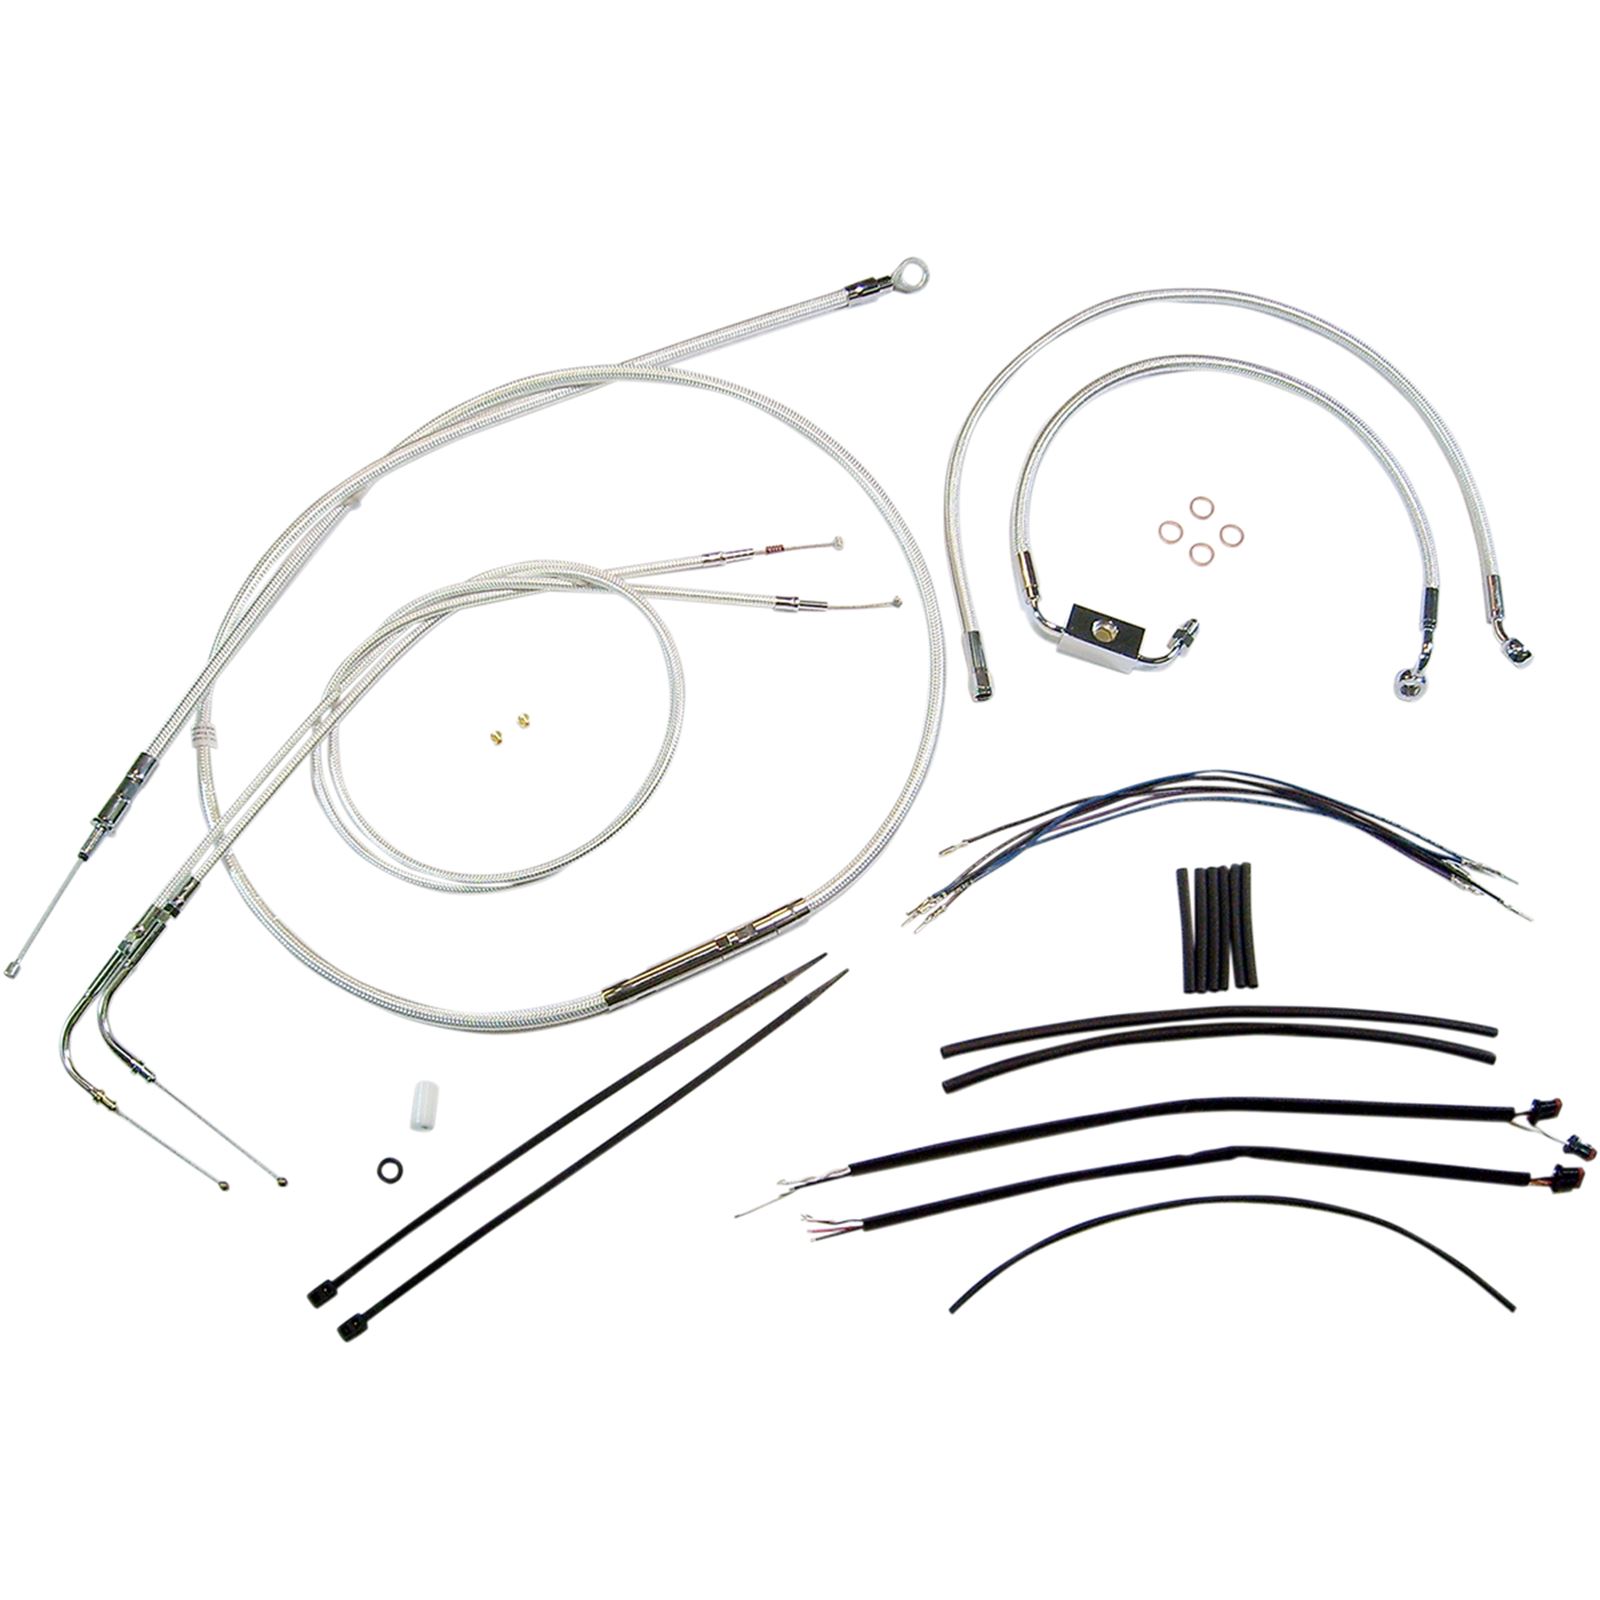 Magnum Sterling Chromite II® Control Cable Kit